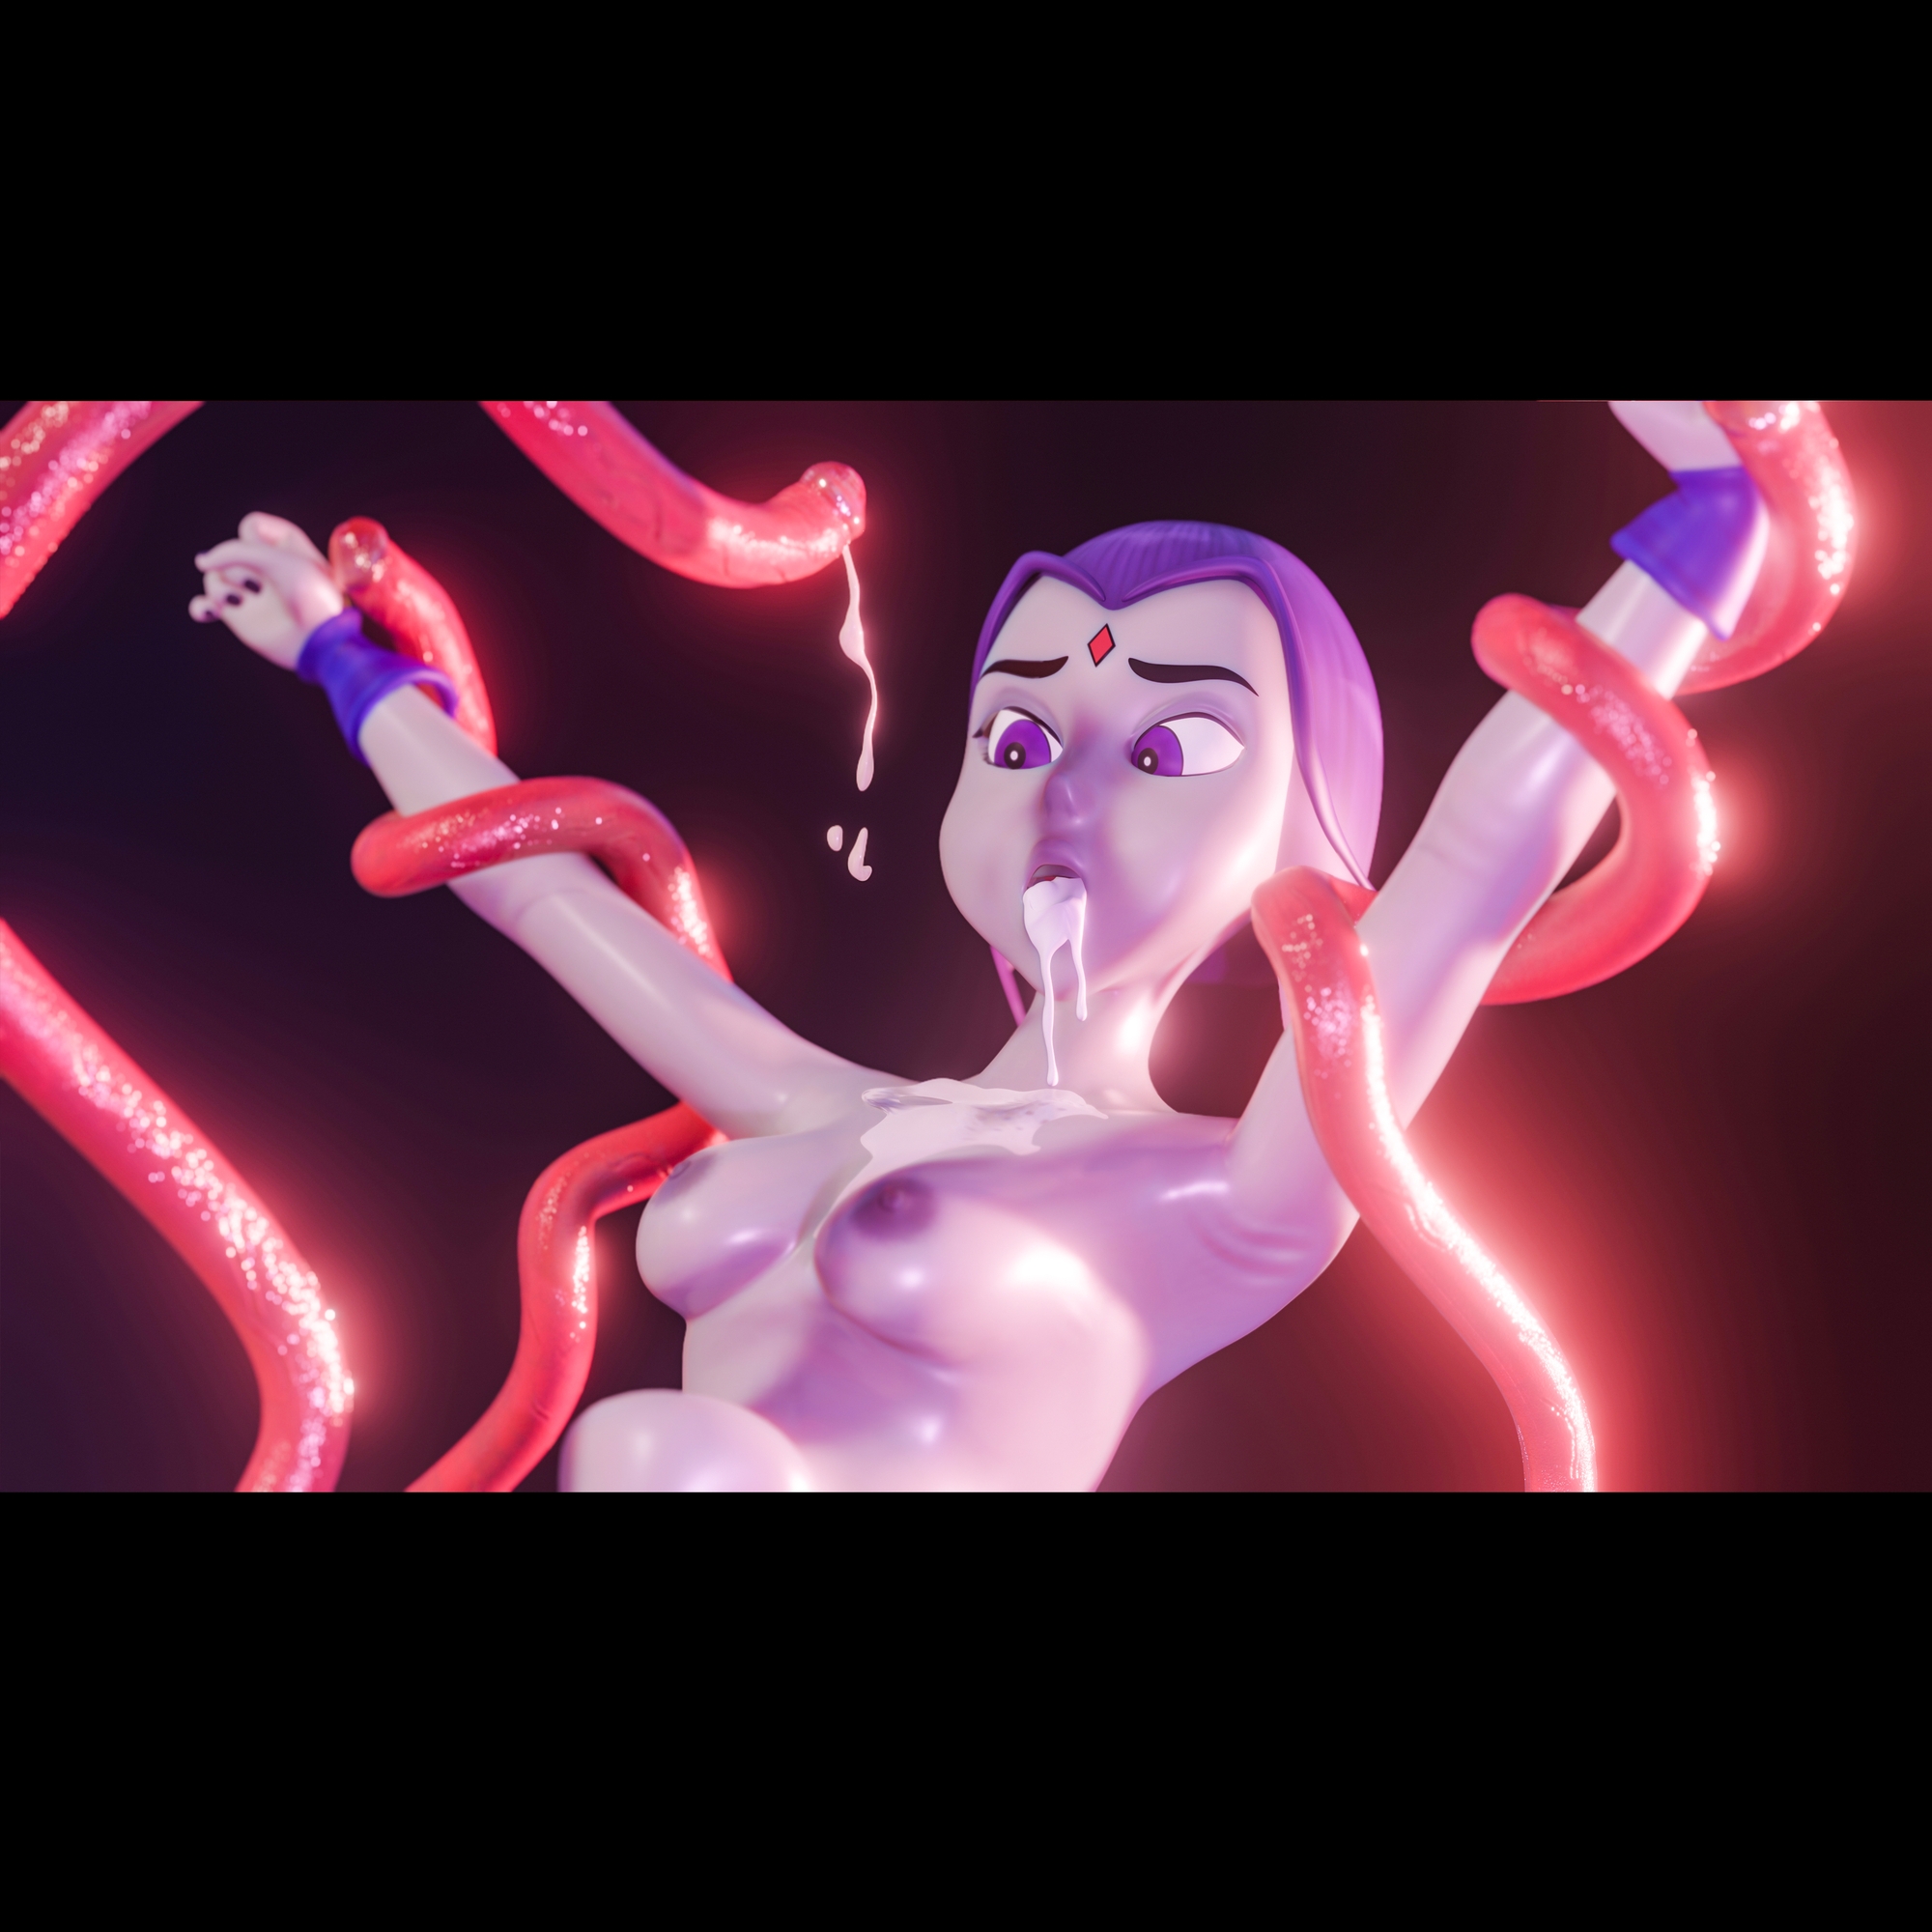 Raven tentacled Raven (teen Titans) Tentacles Cum Cum Inflation All The Way Through 25